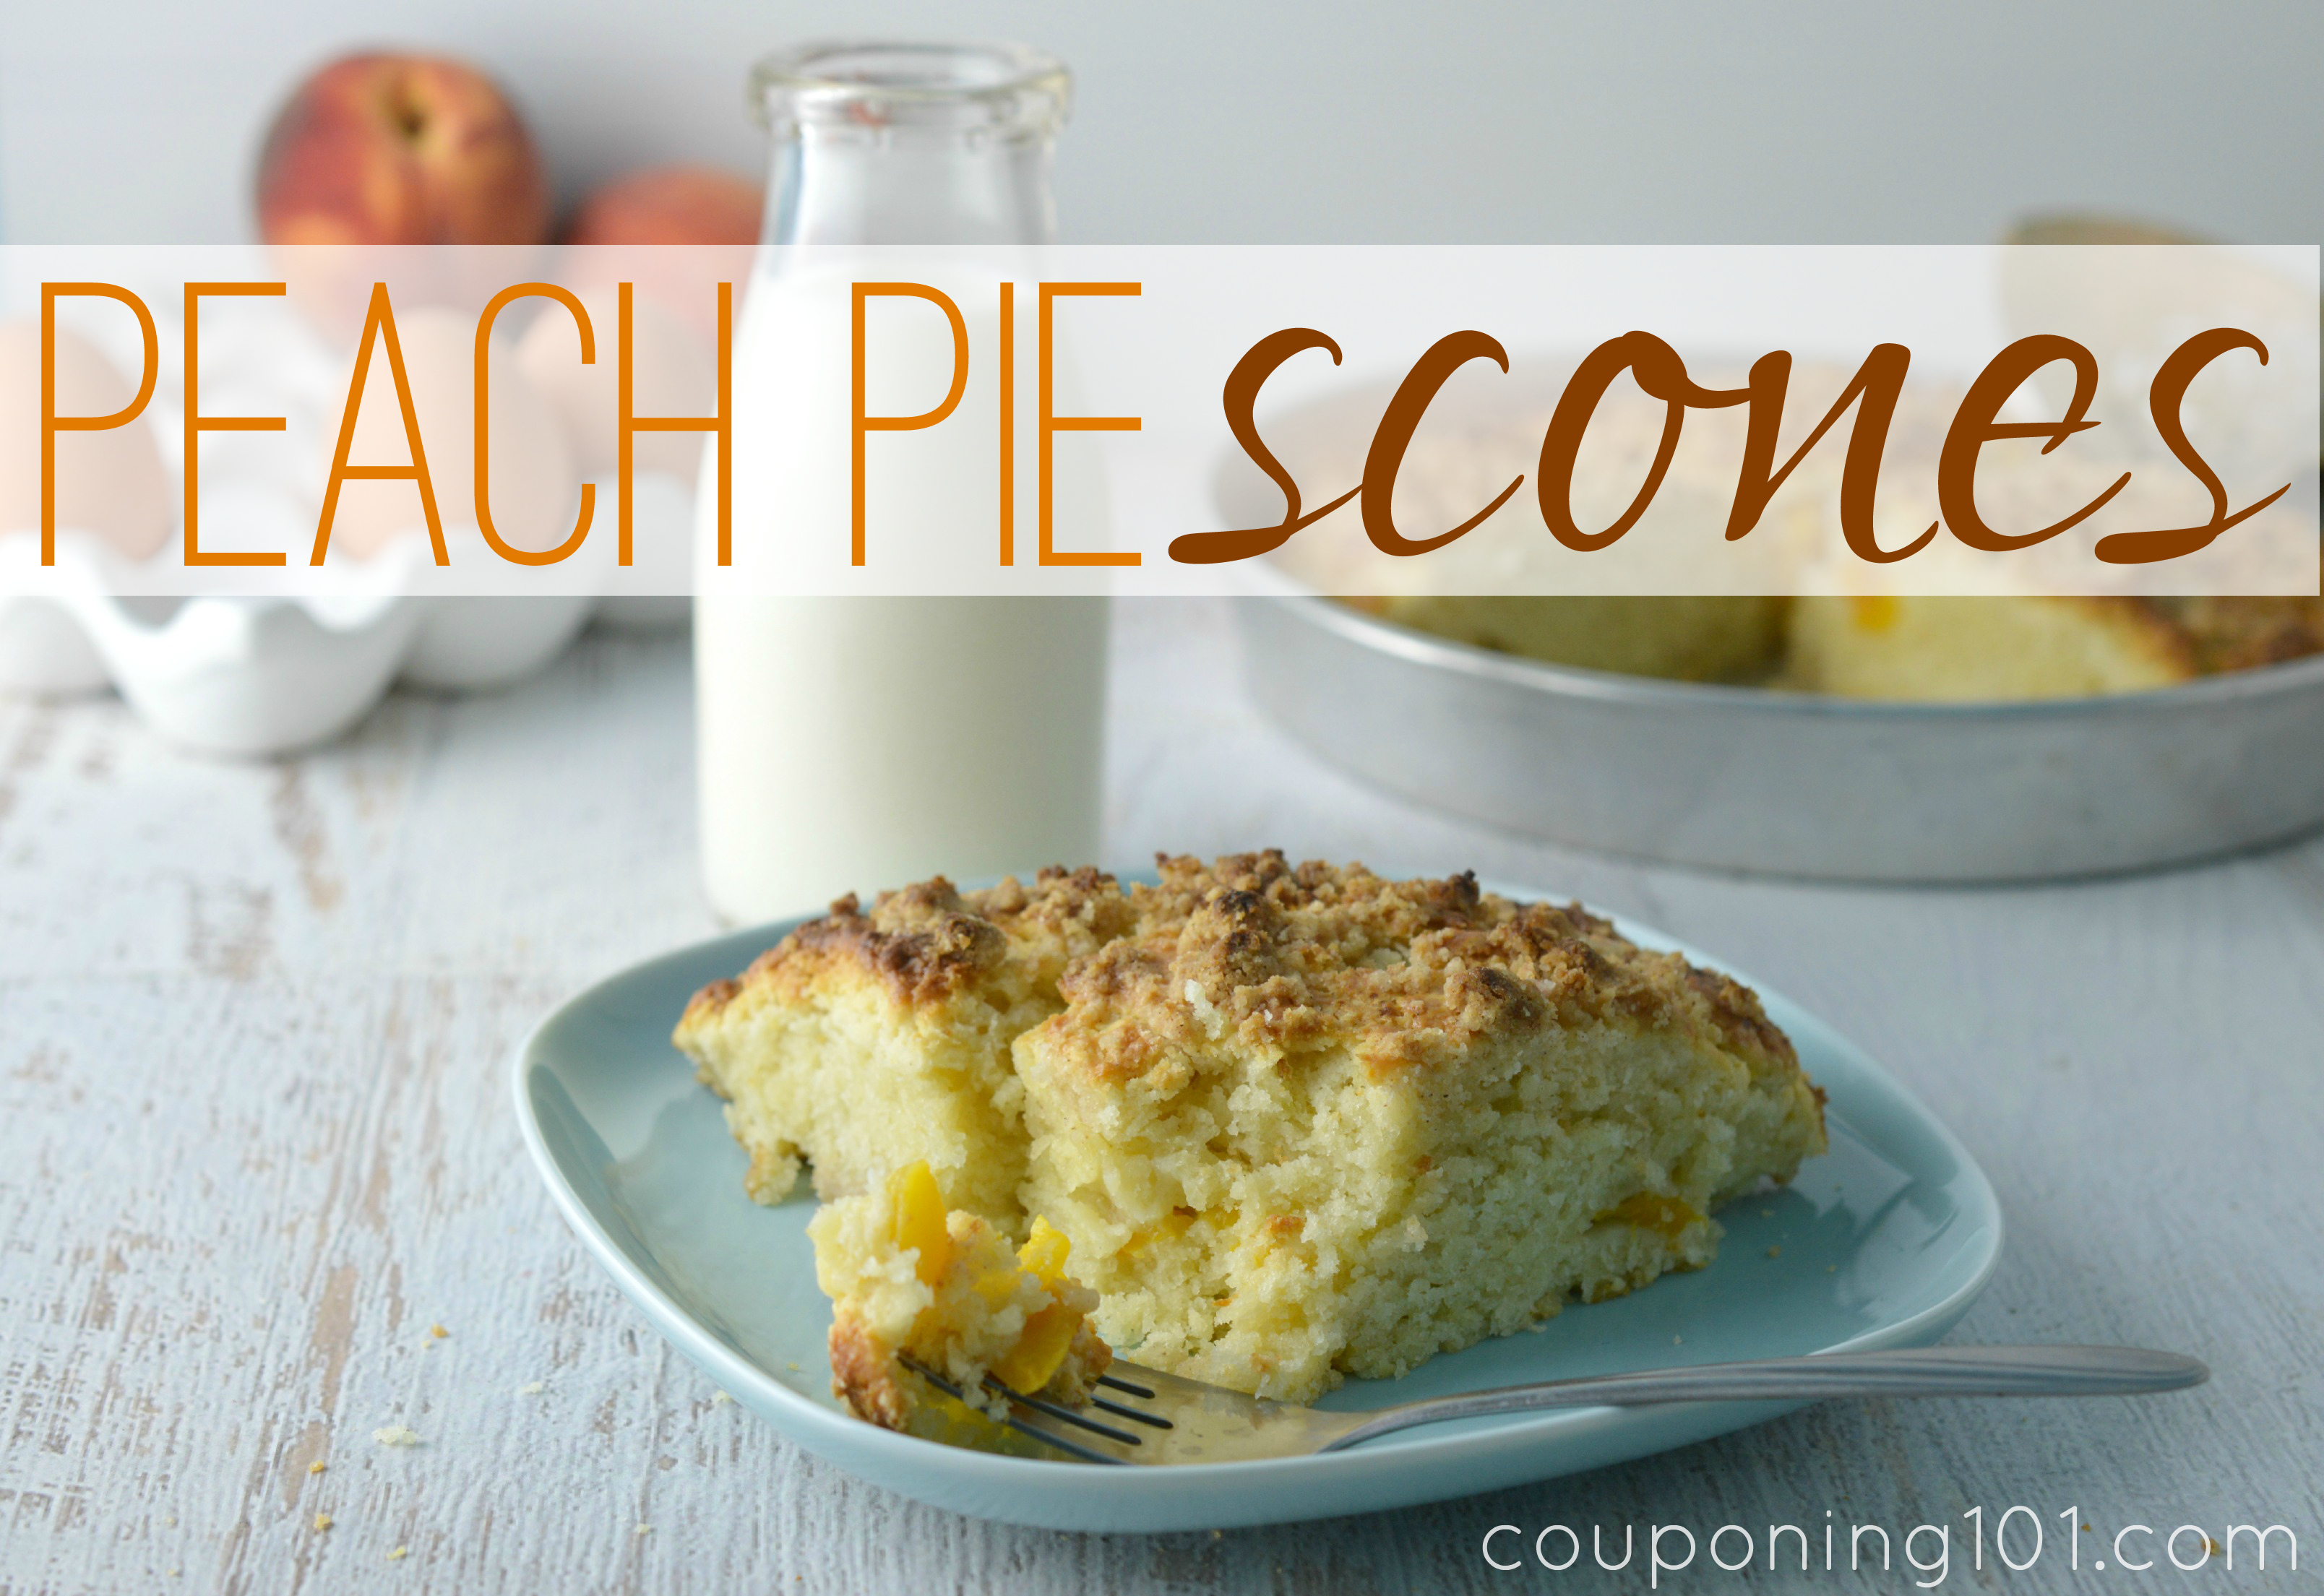 Peach Pie Scones Recipe - these fresh, hot scones taste just like homemade peach pie! Saving this recipe for our next brunch get-together.